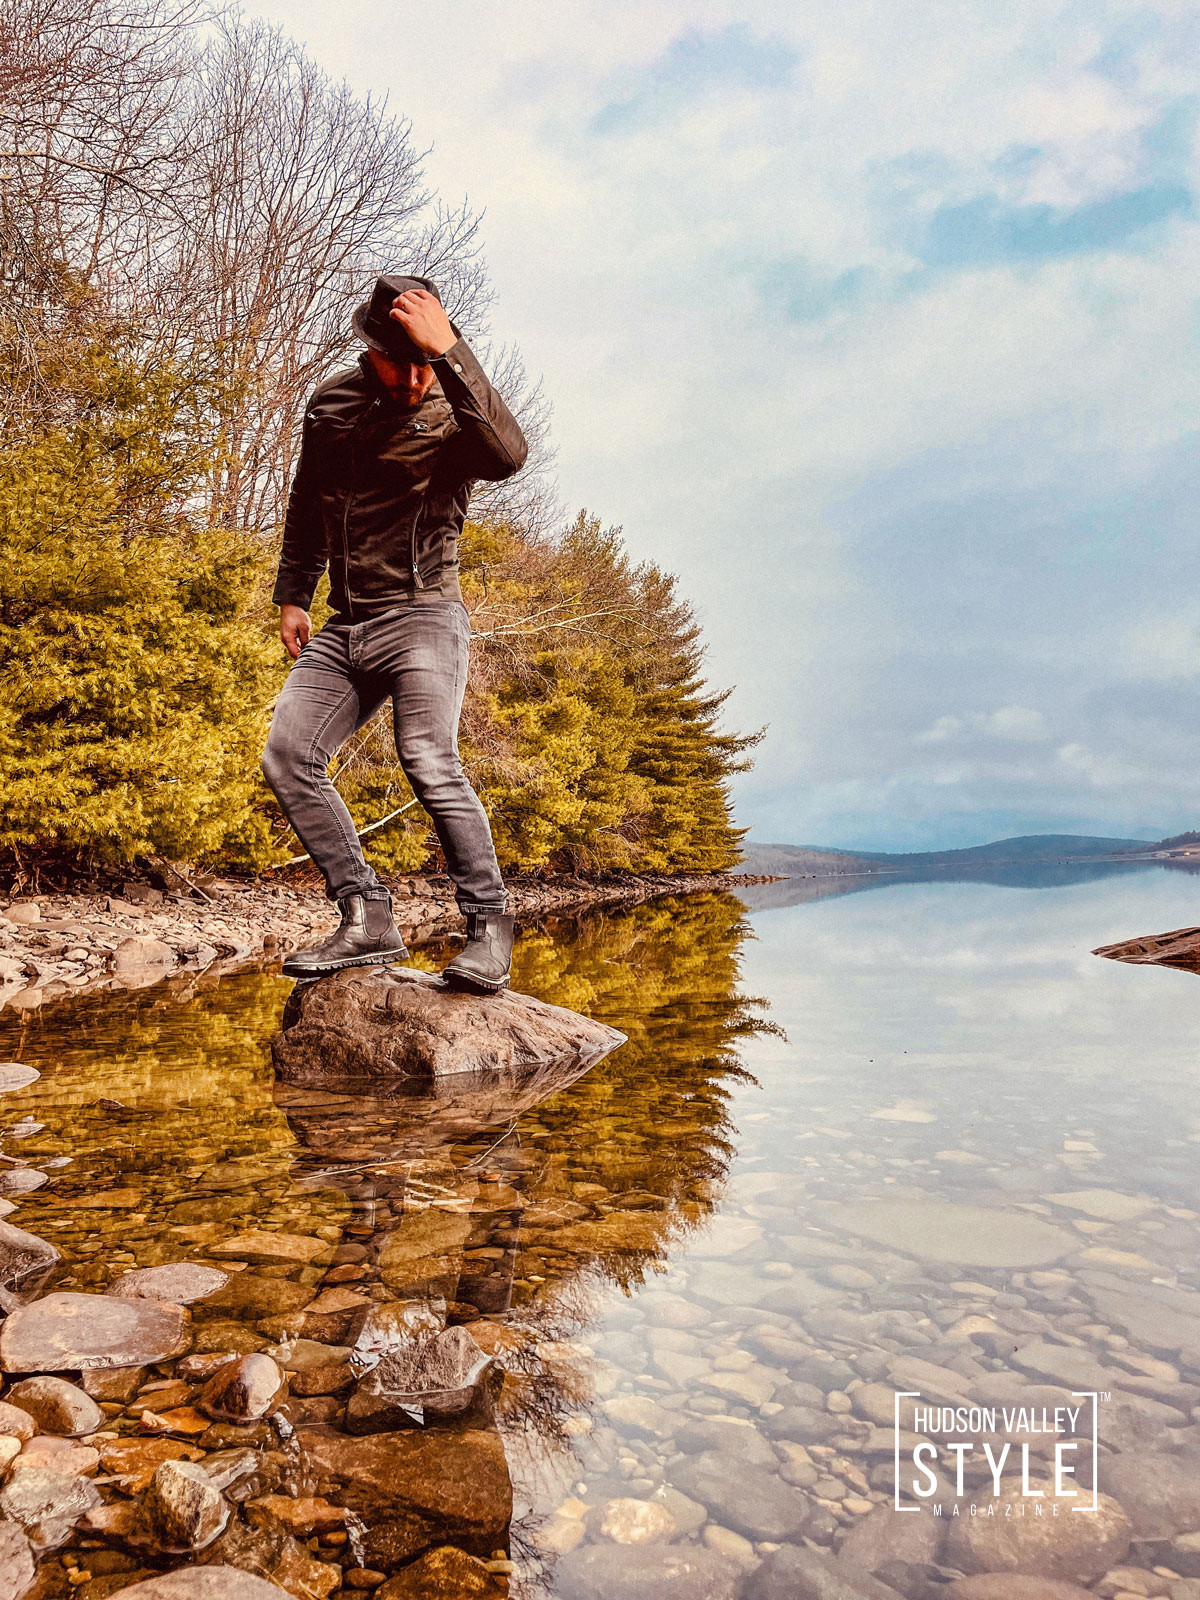 I had to pose, how could I not :) Otherwise how can you say you've been there? – Roundout Reservoir in Catskill Mountains – Photo Story by Maxwell Alexander